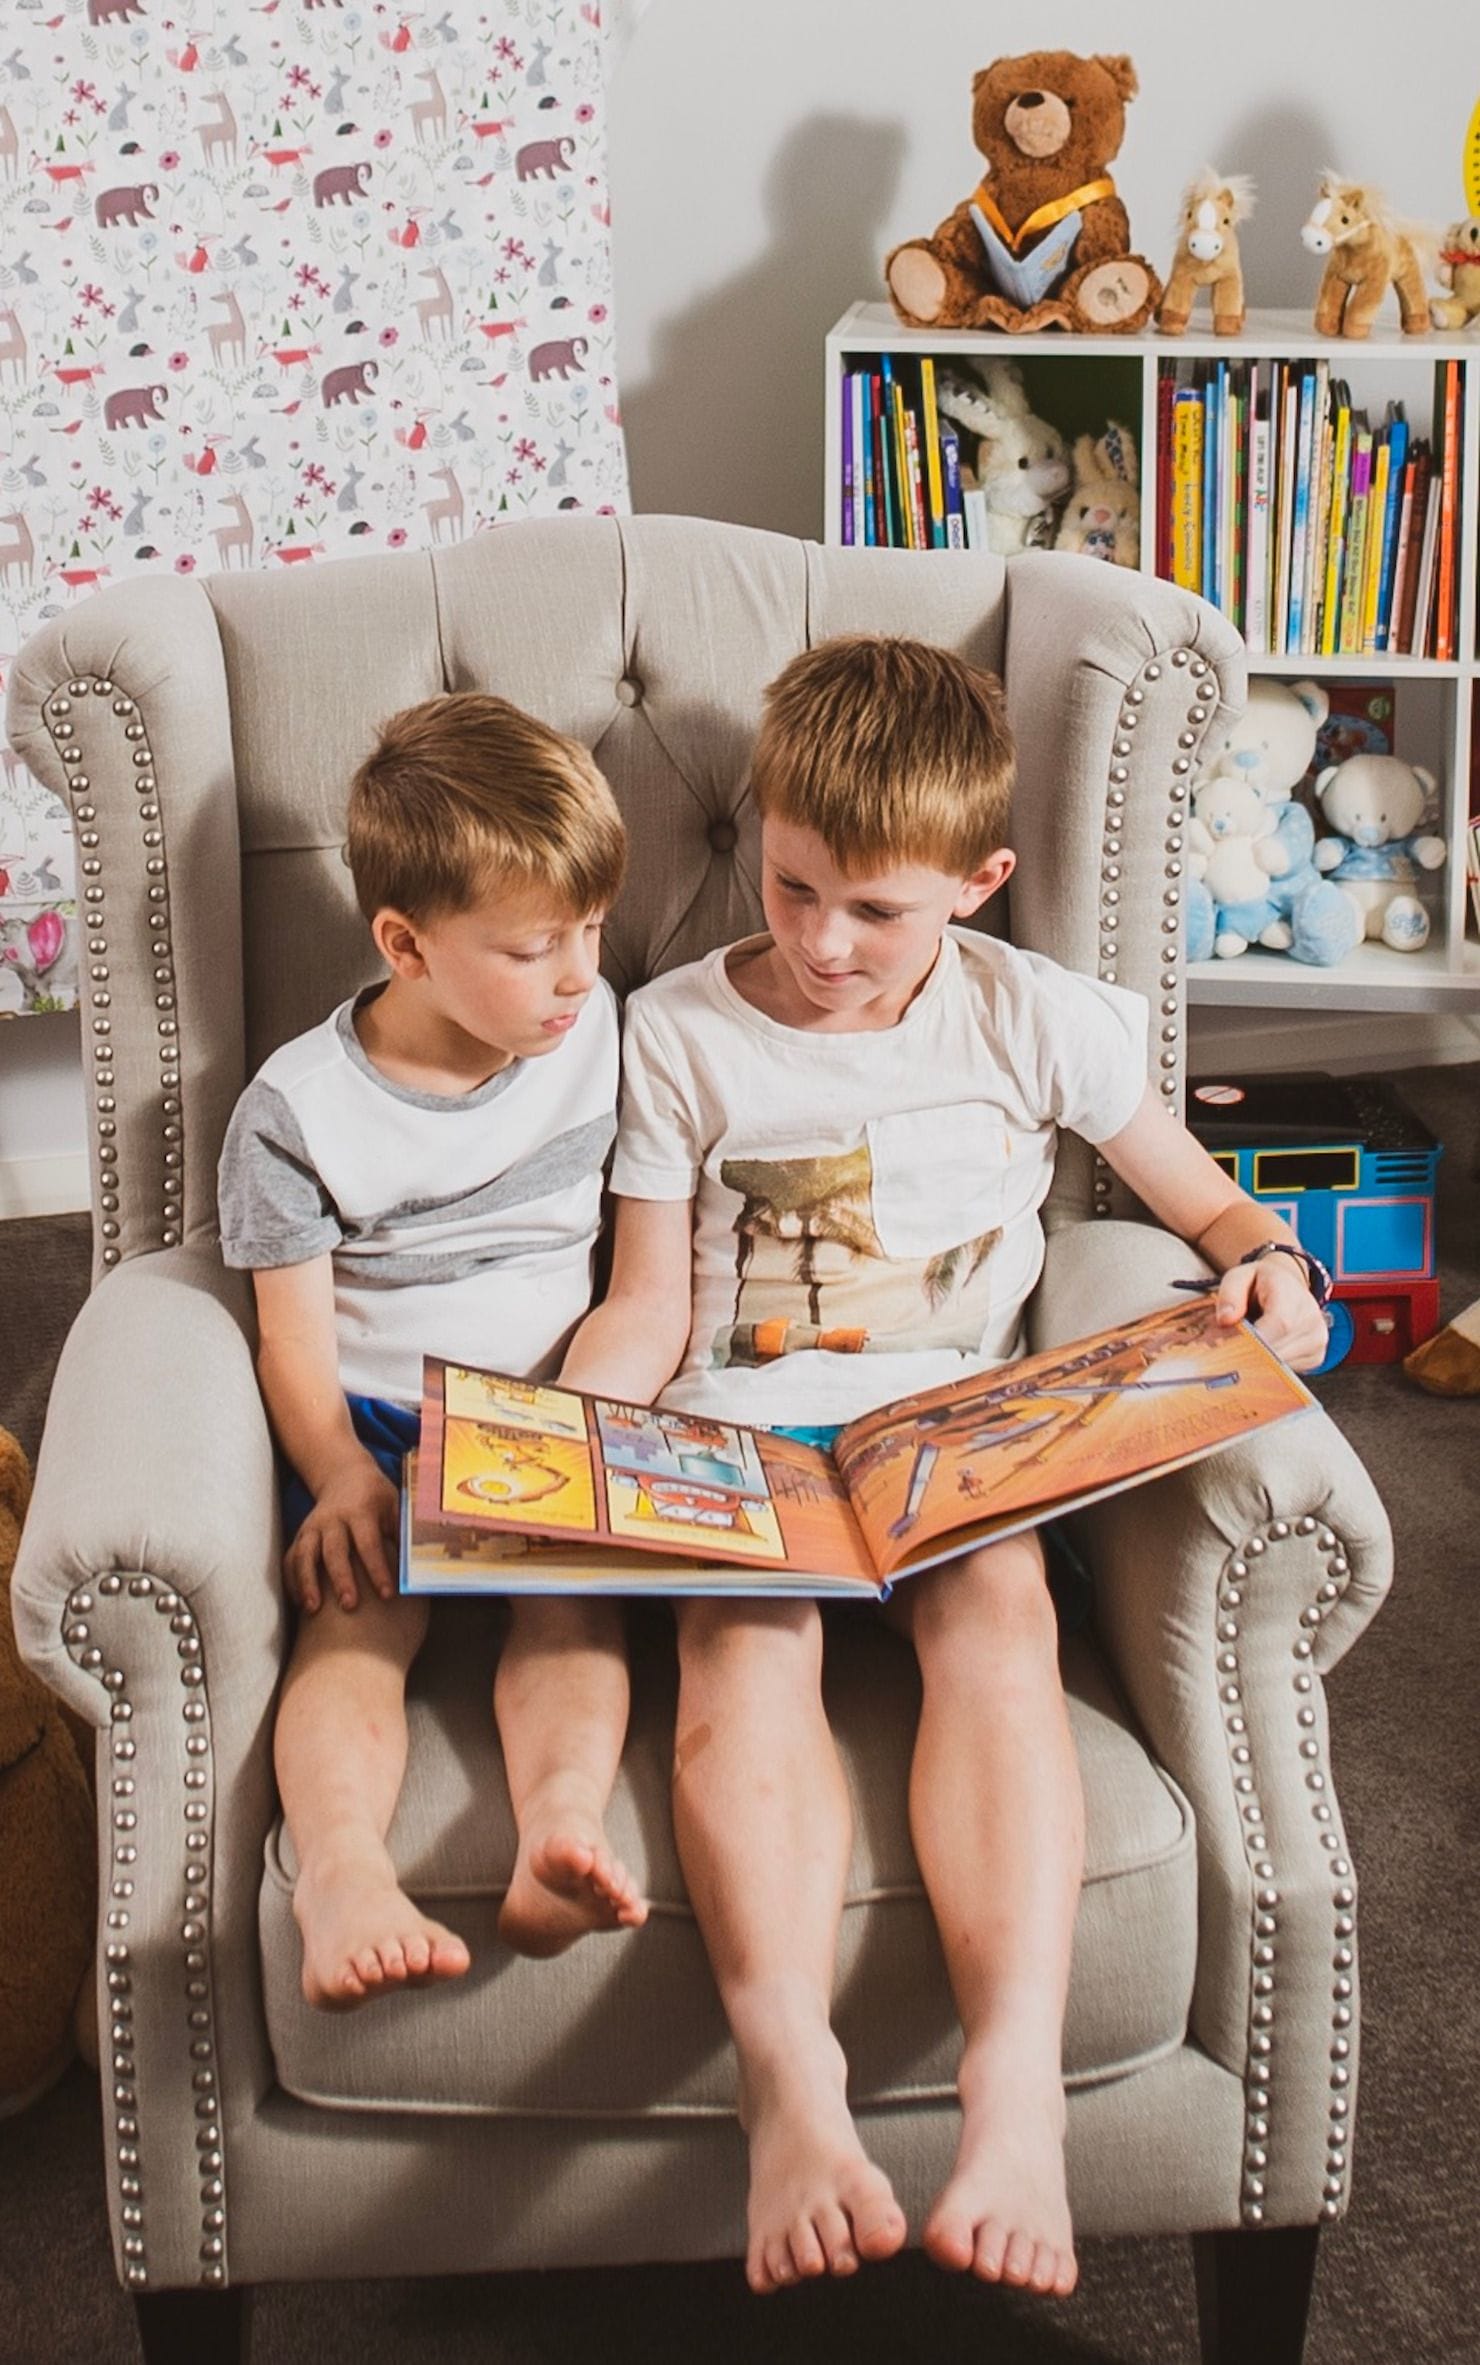 The importance of reading to children